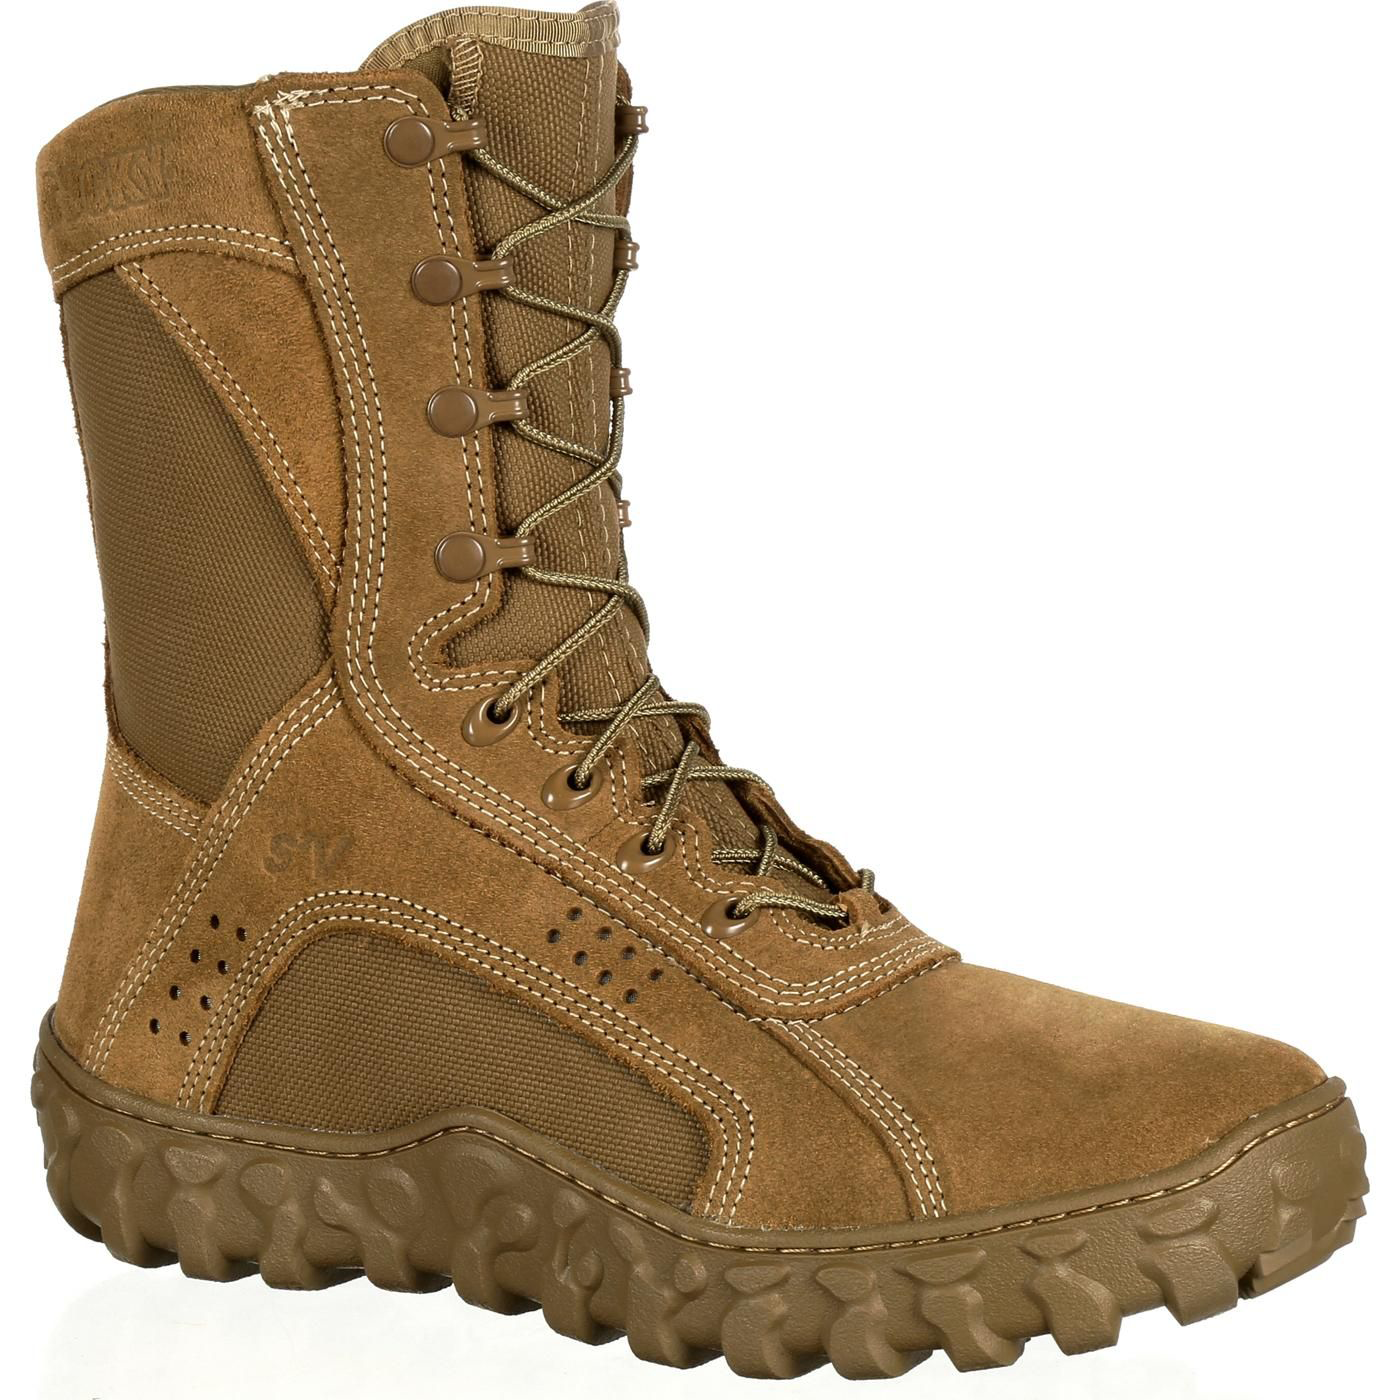 Rocky S2V Tactical Military Boots for Men - Coyote Brown - 15W